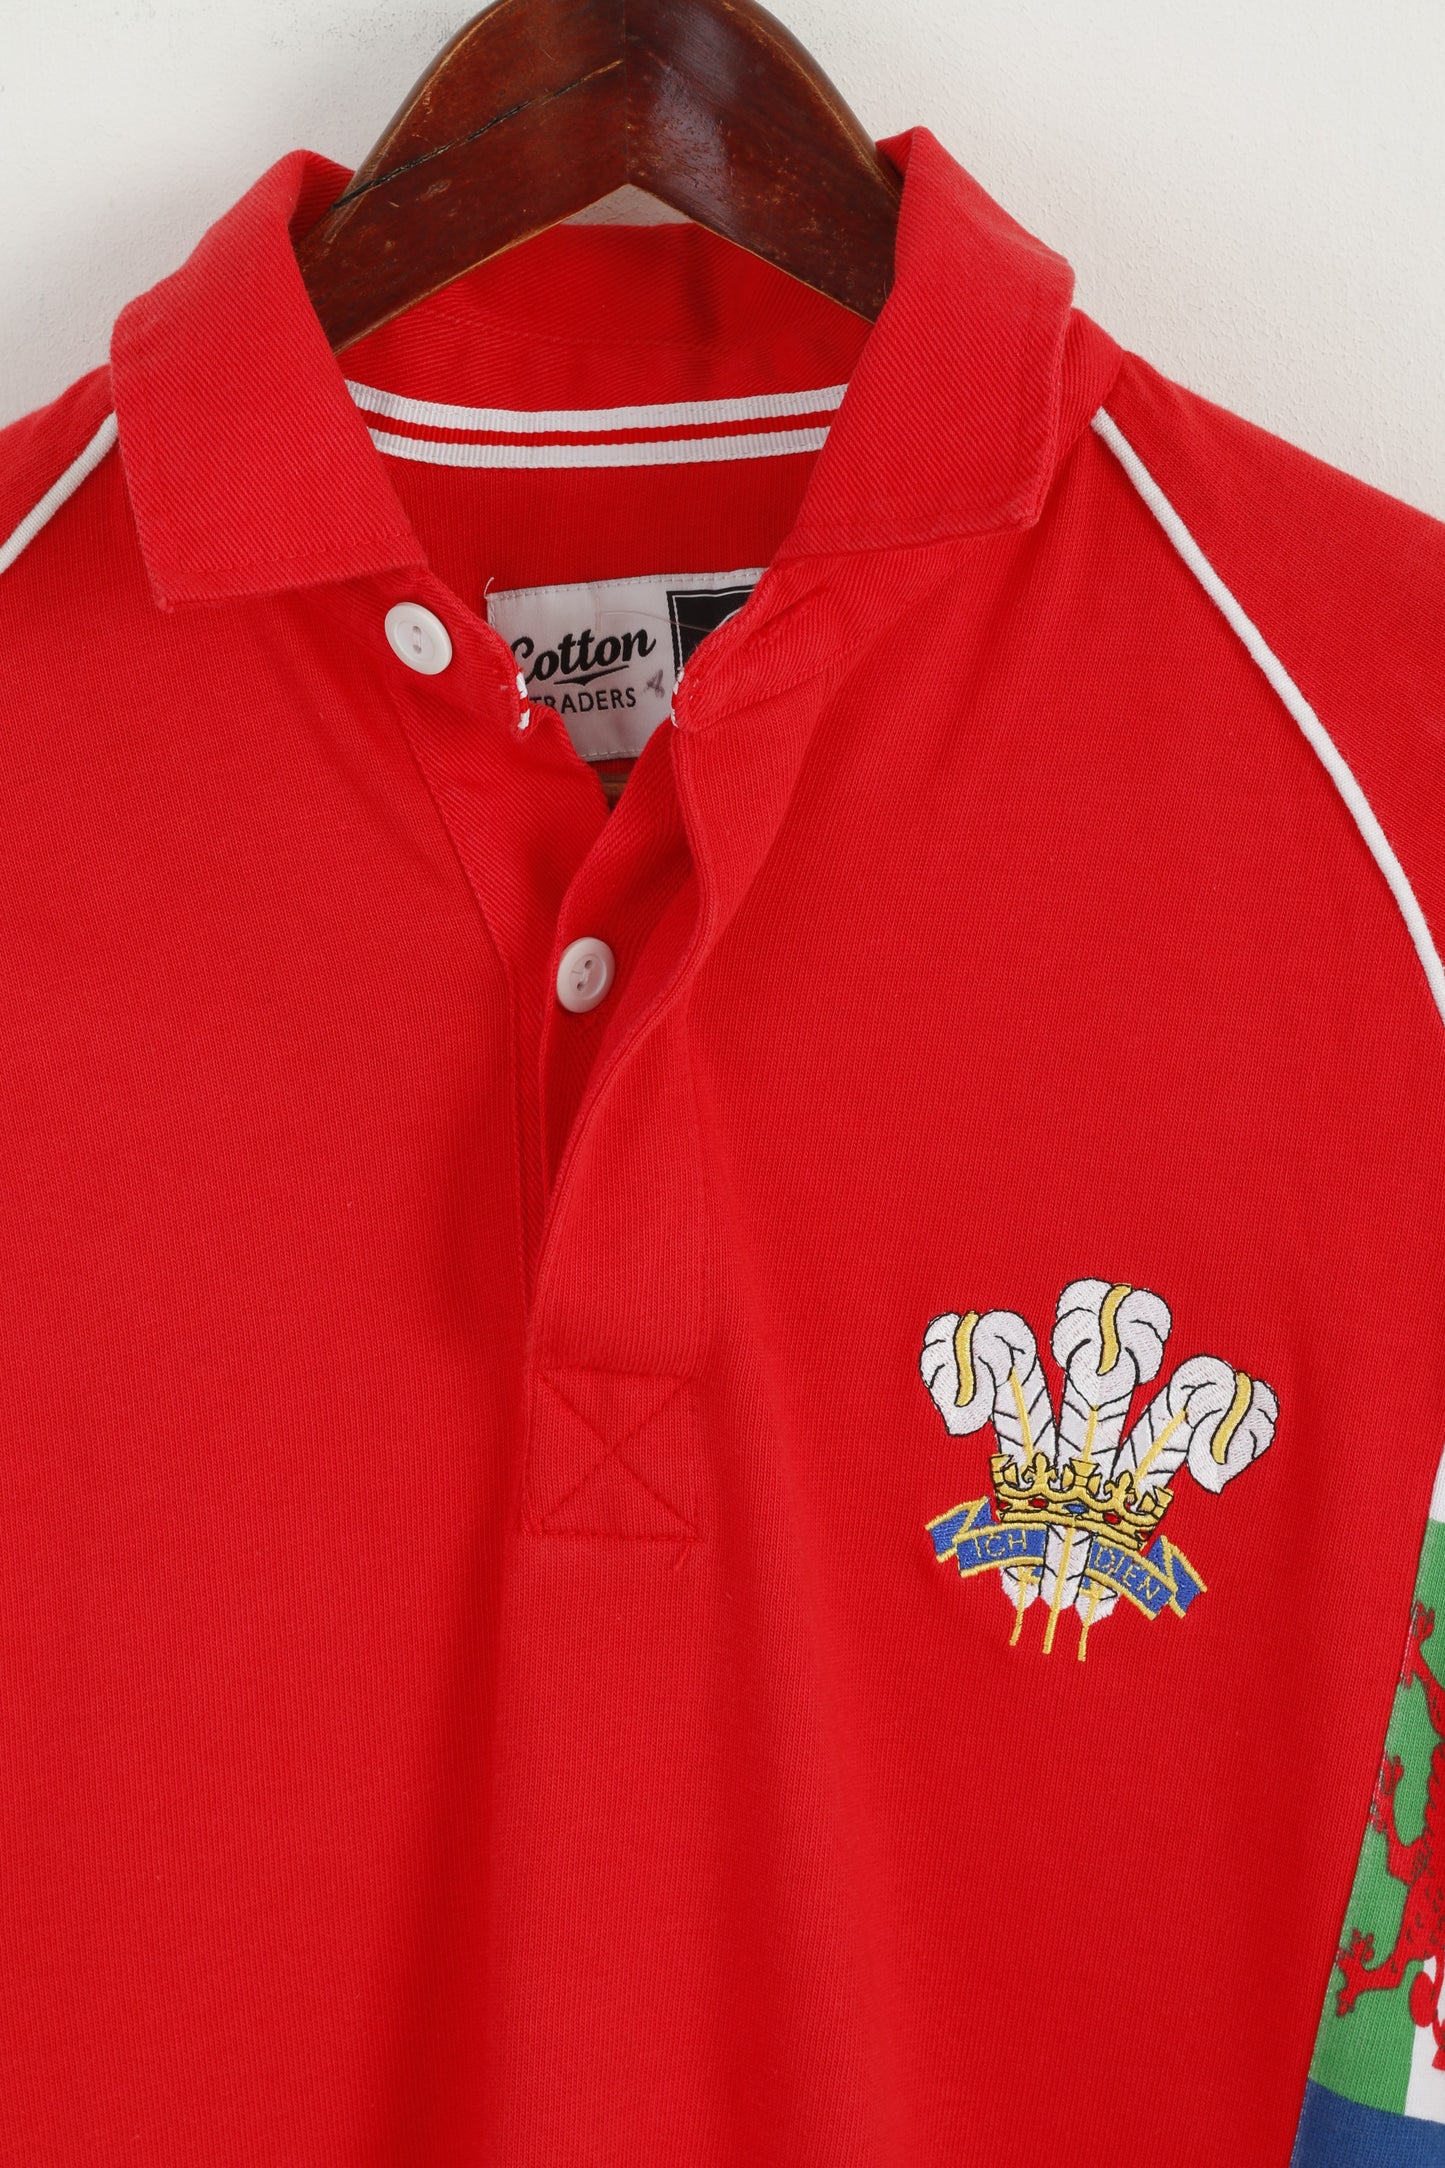 Cotton Traders Men S Polo Shirt Red Cotton Welsh WRU CYMRU Rugby Top